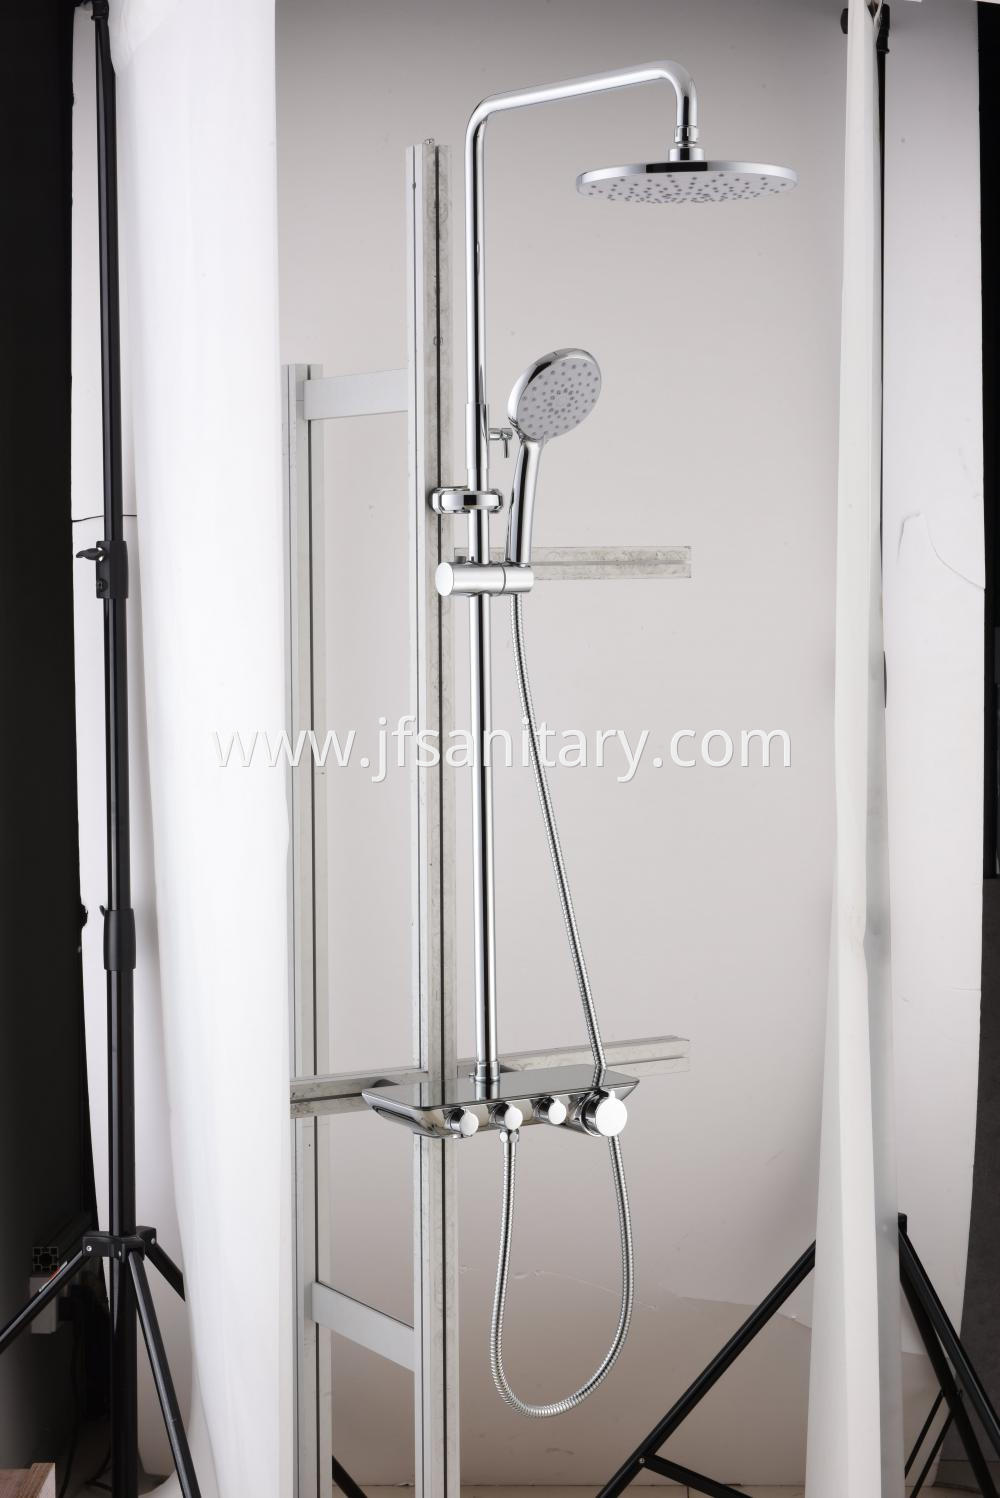 New Luxury Wall Mounted Bathroom Shower Faucet Set